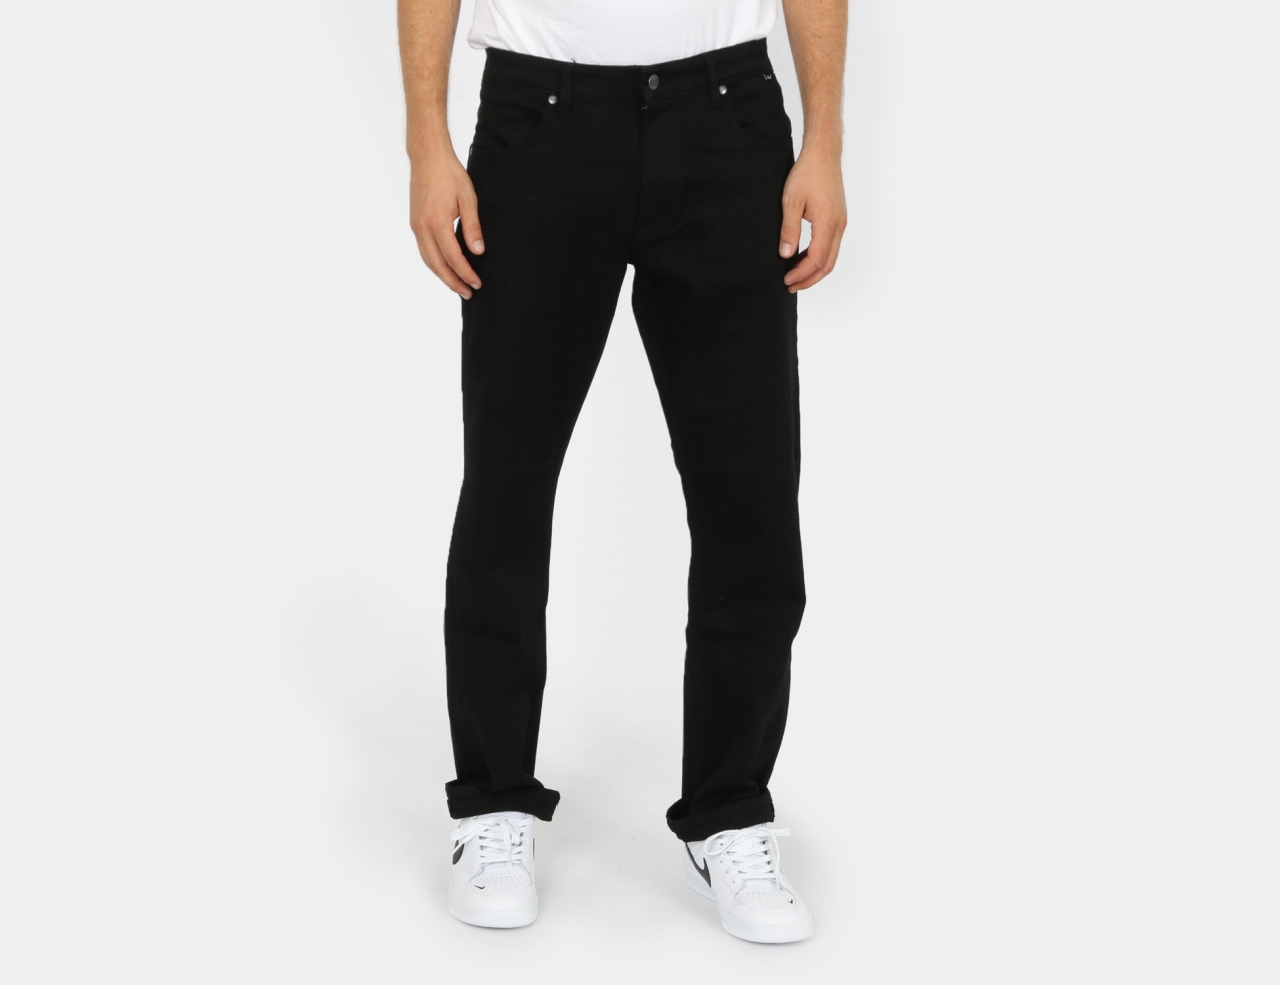 Reell Jeans Lowfly 2 Regular Straight Fit Jeans - Black